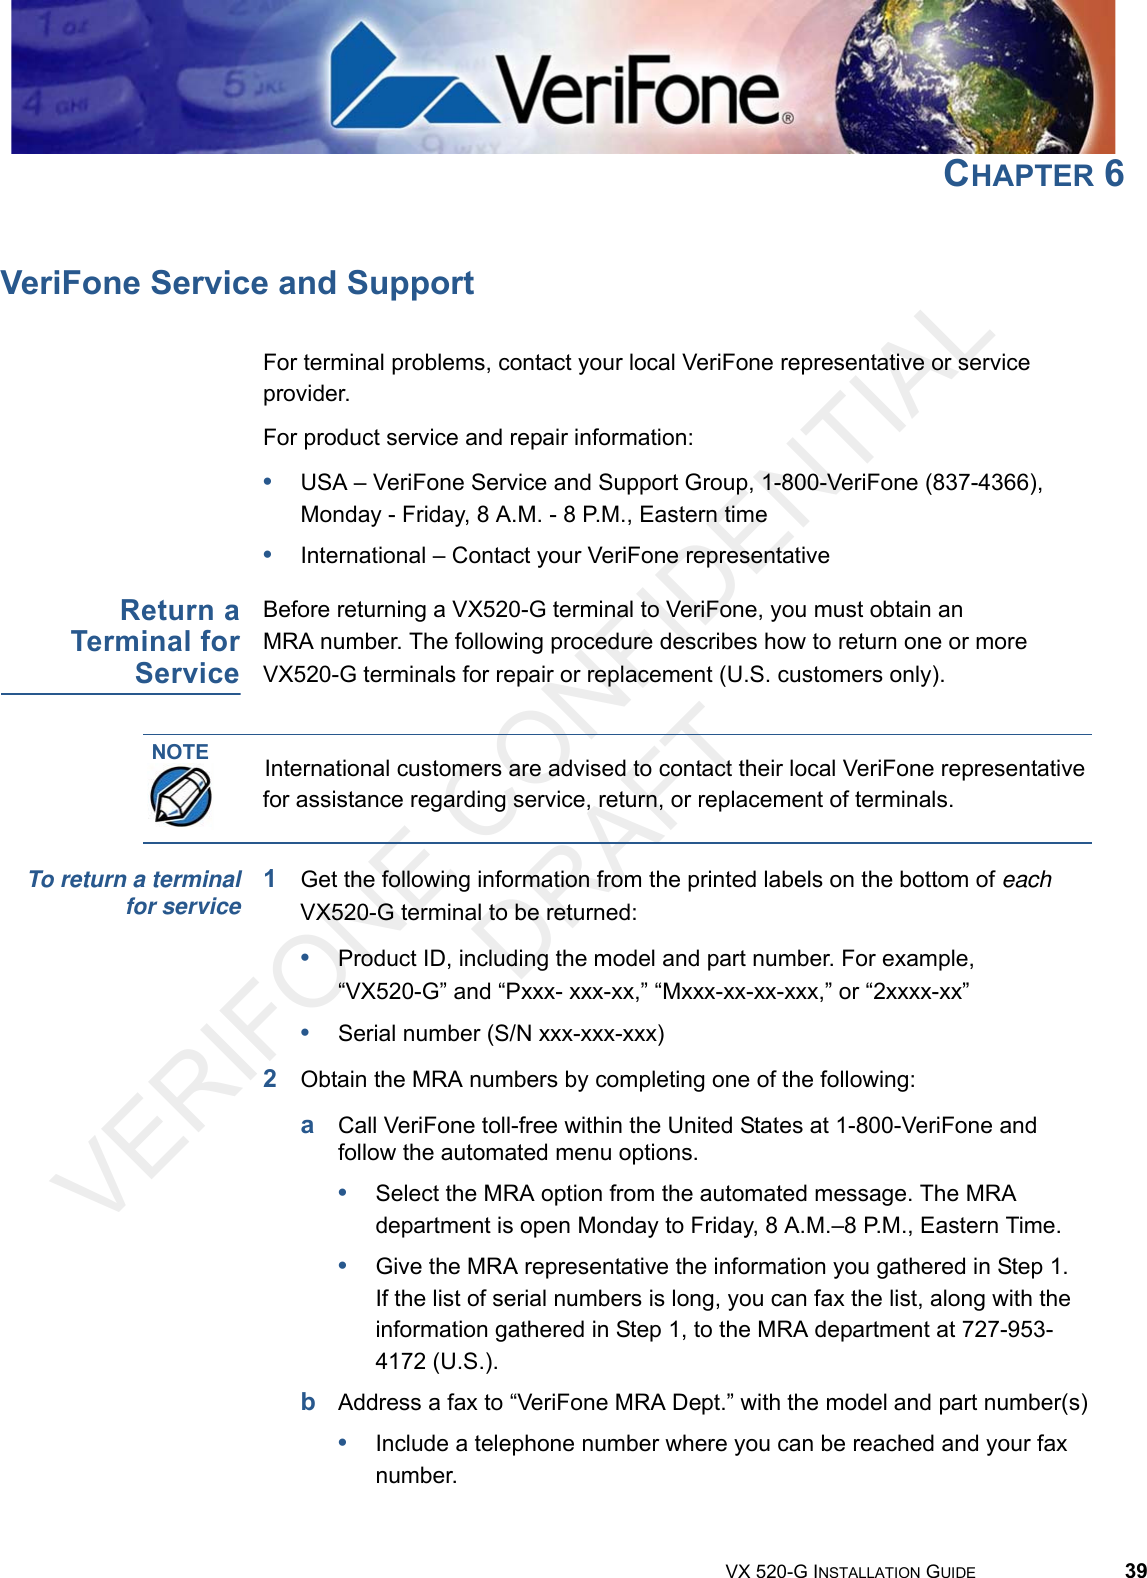 VERIFONE CONFIDENTIAL DRAFTVX 520-G INSTALLATION GUIDE 39CHAPTER 6VeriFone Service and SupportFor terminal problems, contact your local VeriFone representative or service provider. For product service and repair information:•USA – VeriFone Service and Support Group, 1-800-VeriFone (837-4366), Monday - Friday, 8 A.M. - 8 P.M., Eastern time•International – Contact your VeriFone representative Return aTerminal forServiceBefore returning a VX520-G terminal to VeriFone, you must obtain an MRA number. The following procedure describes how to return one or more VX520-G terminals for repair or replacement (U.S. customers only). To return a terminalfor service 1Get the following information from the printed labels on the bottom of each VX520-G terminal to be returned:•Product ID, including the model and part number. For example, “VX520-G” and “Pxxx- xxx-xx,” “Mxxx-xx-xx-xxx,” or “2xxxx-xx”•Serial number (S/N xxx-xxx-xxx)2Obtain the MRA numbers by completing one of the following:aCall VeriFone toll-free within the United States at 1-800-VeriFone and follow the automated menu options.•Select the MRA option from the automated message. The MRA department is open Monday to Friday, 8 A.M.–8 P.M., Eastern Time.•Give the MRA representative the information you gathered in Step 1.If the list of serial numbers is long, you can fax the list, along with the information gathered in Step 1, to the MRA department at 727-953-4172 (U.S.).bAddress a fax to “VeriFone MRA Dept.” with the model and part number(s)•Include a telephone number where you can be reached and your fax number.NOTE International customers are advised to contact their local VeriFone representative for assistance regarding service, return, or replacement of terminals.